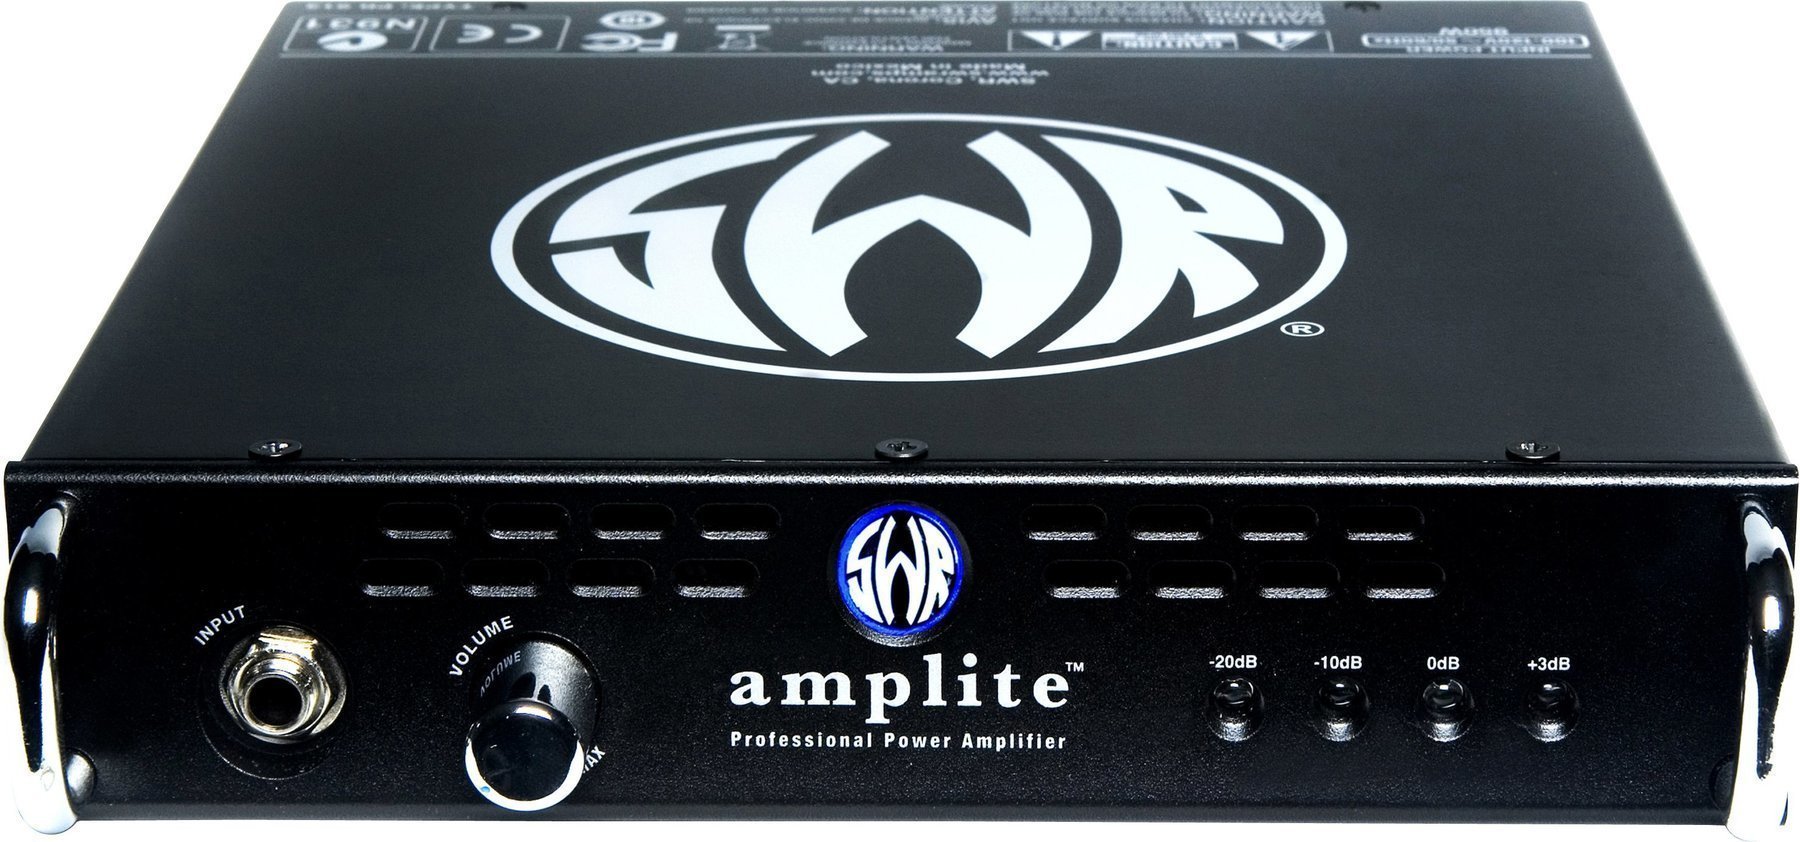 Solid-State Bass Amplifier SWR Amplite